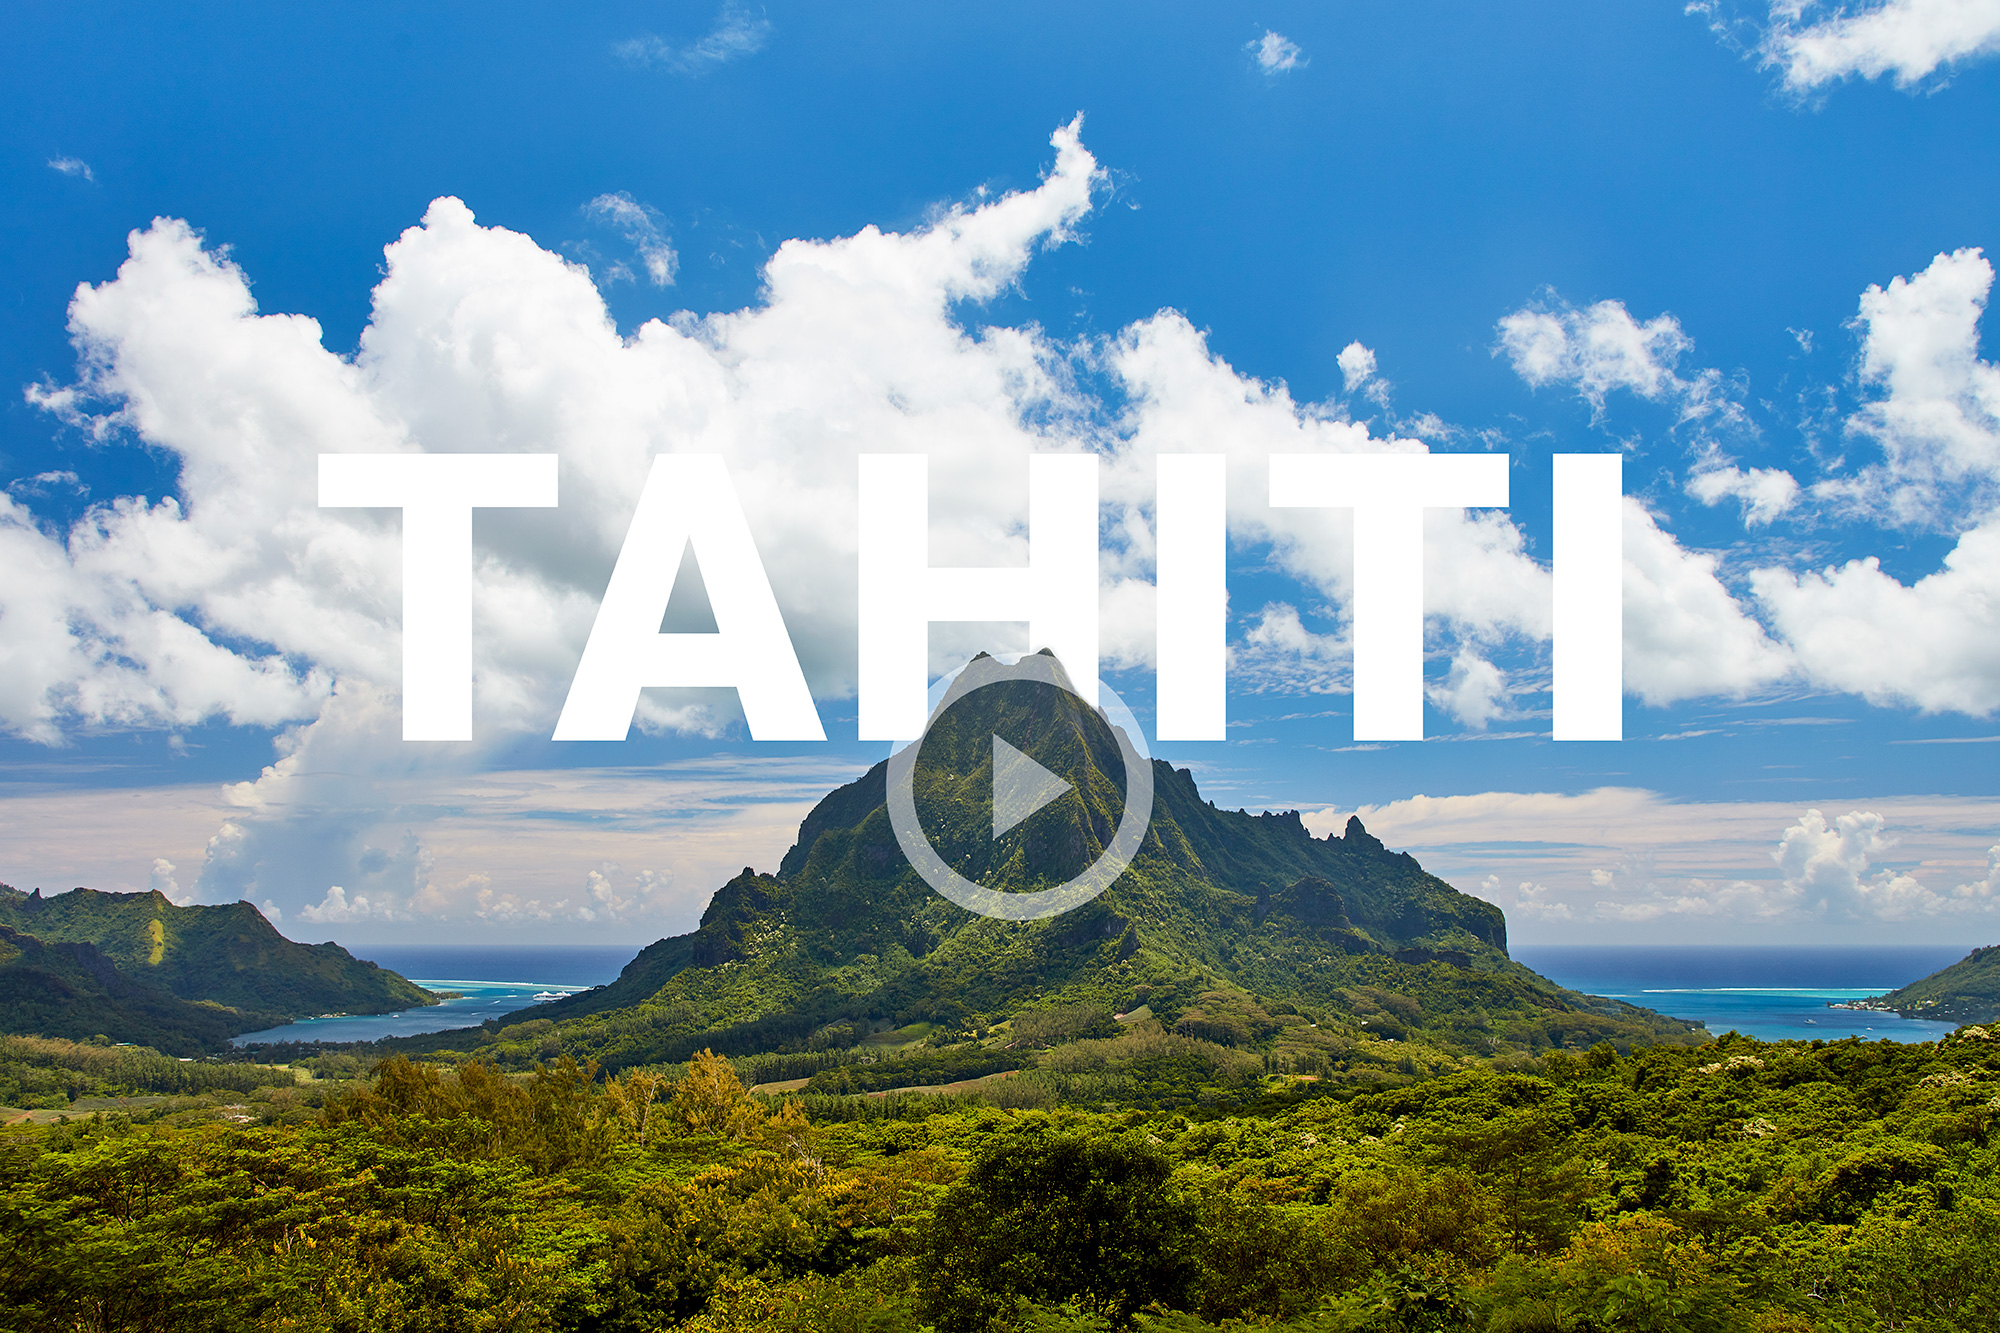 Watch a tight 1 min movie from my recent trip to Tahiti